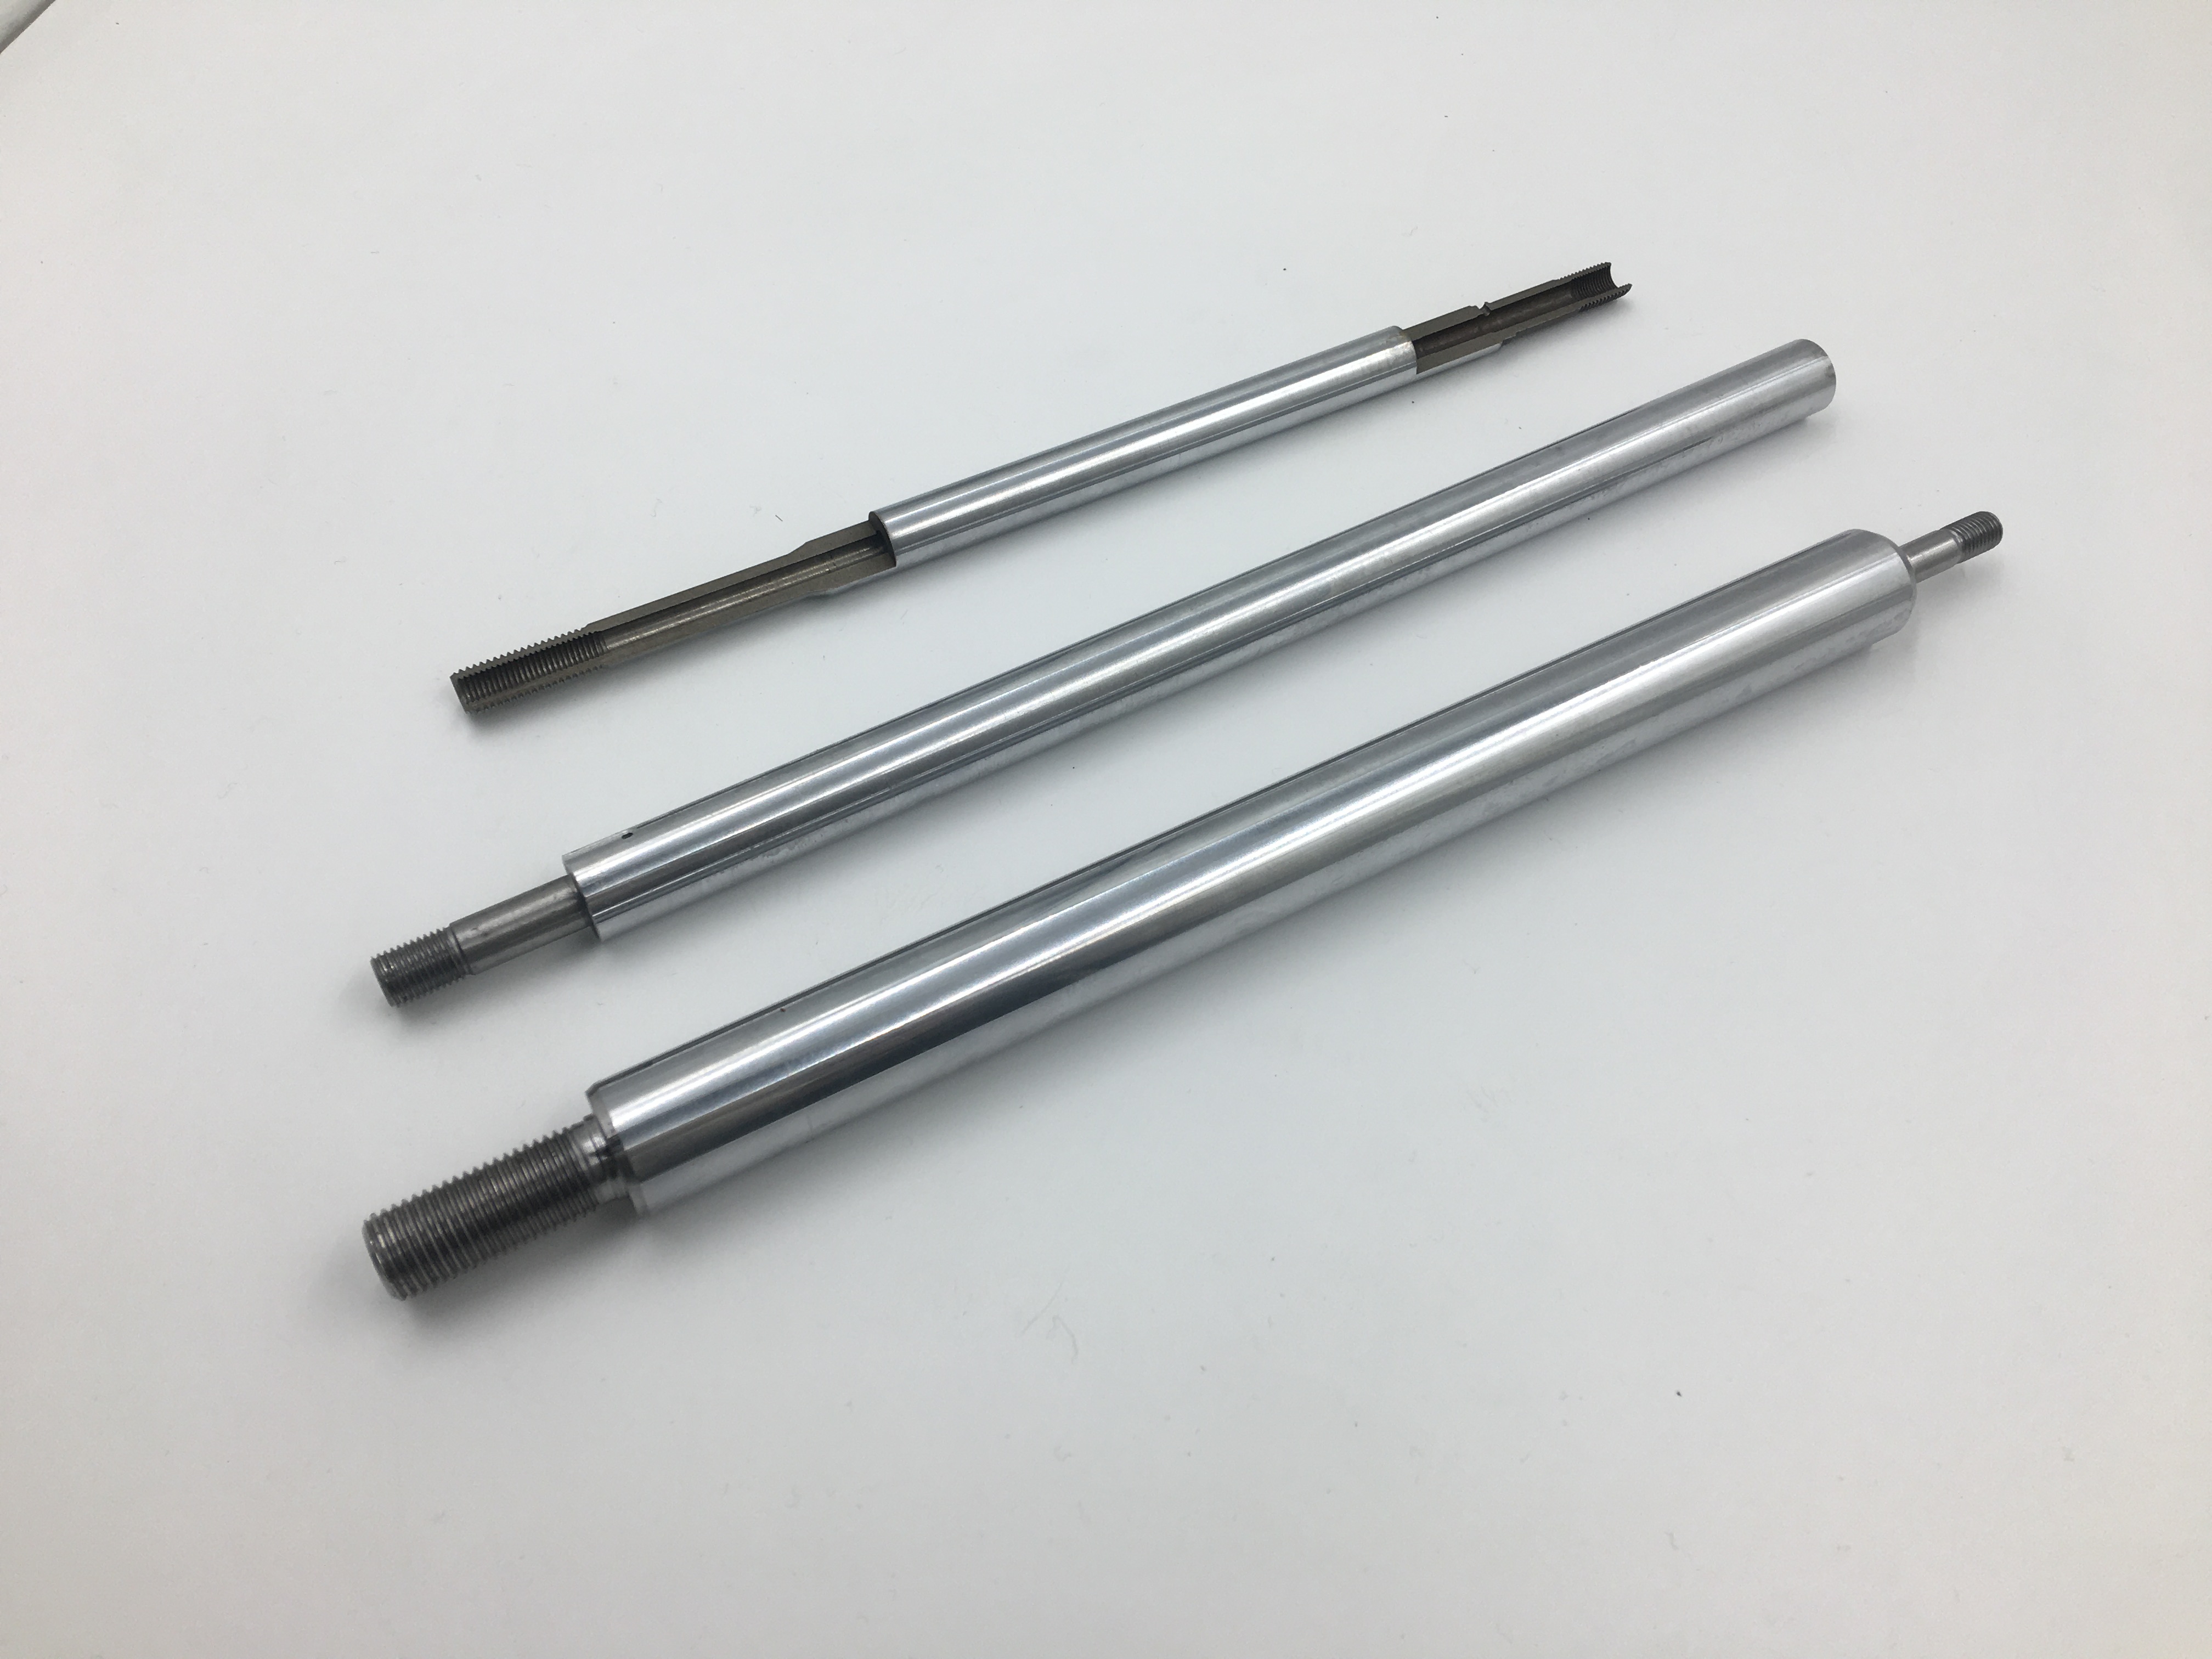 Piston rod commonly used material and selection